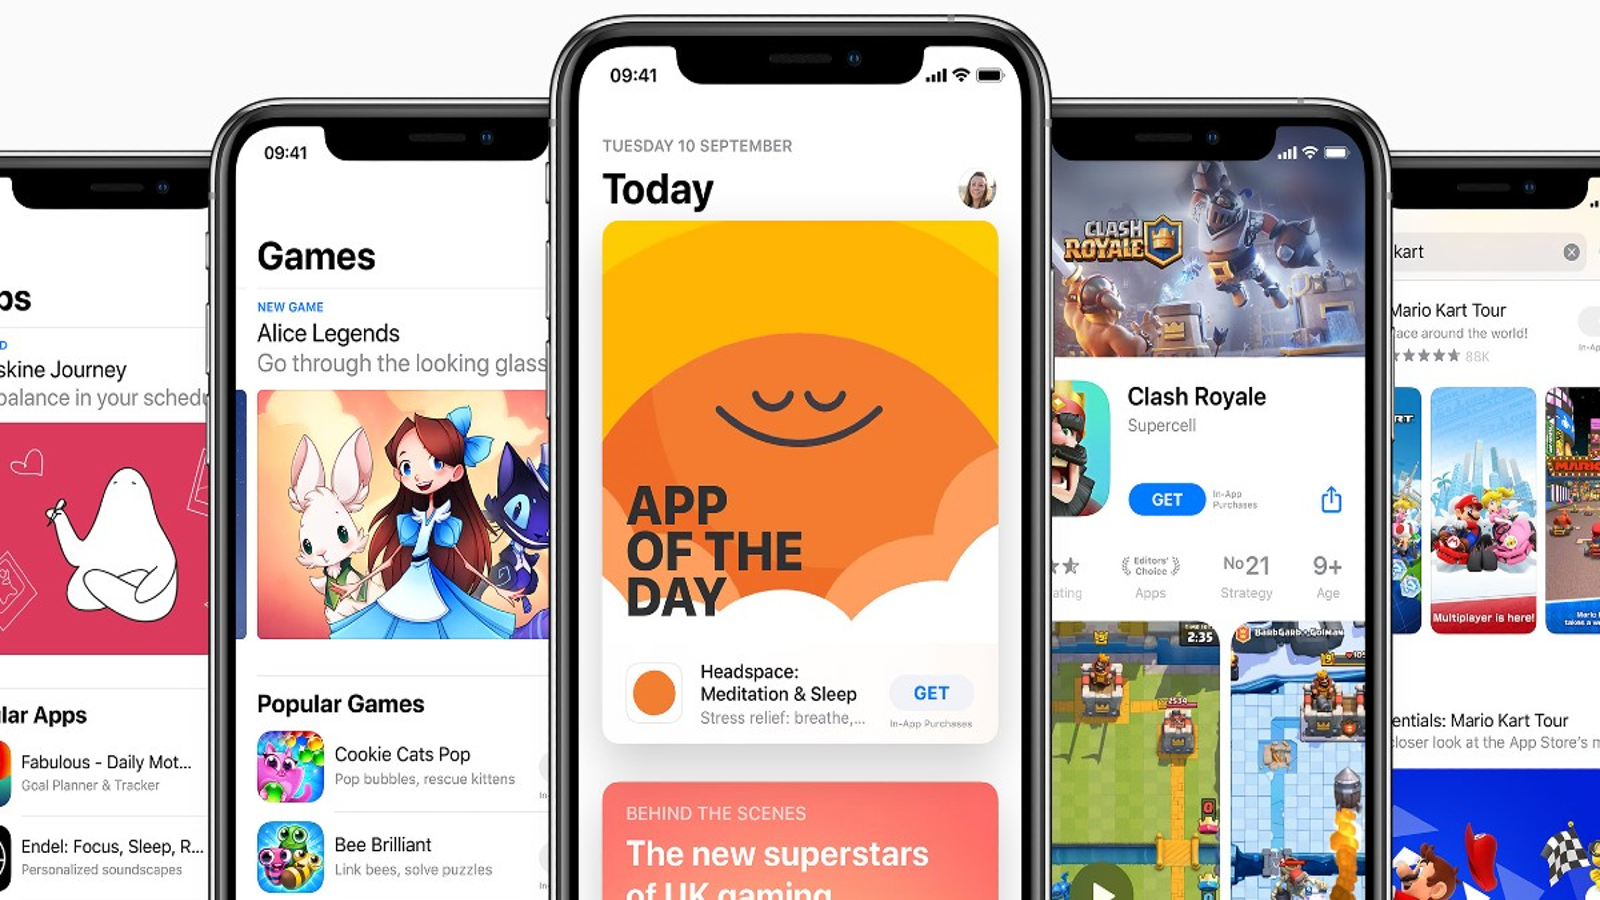 Epic Games Store iOS & Android mobile app is a goal, says Tim